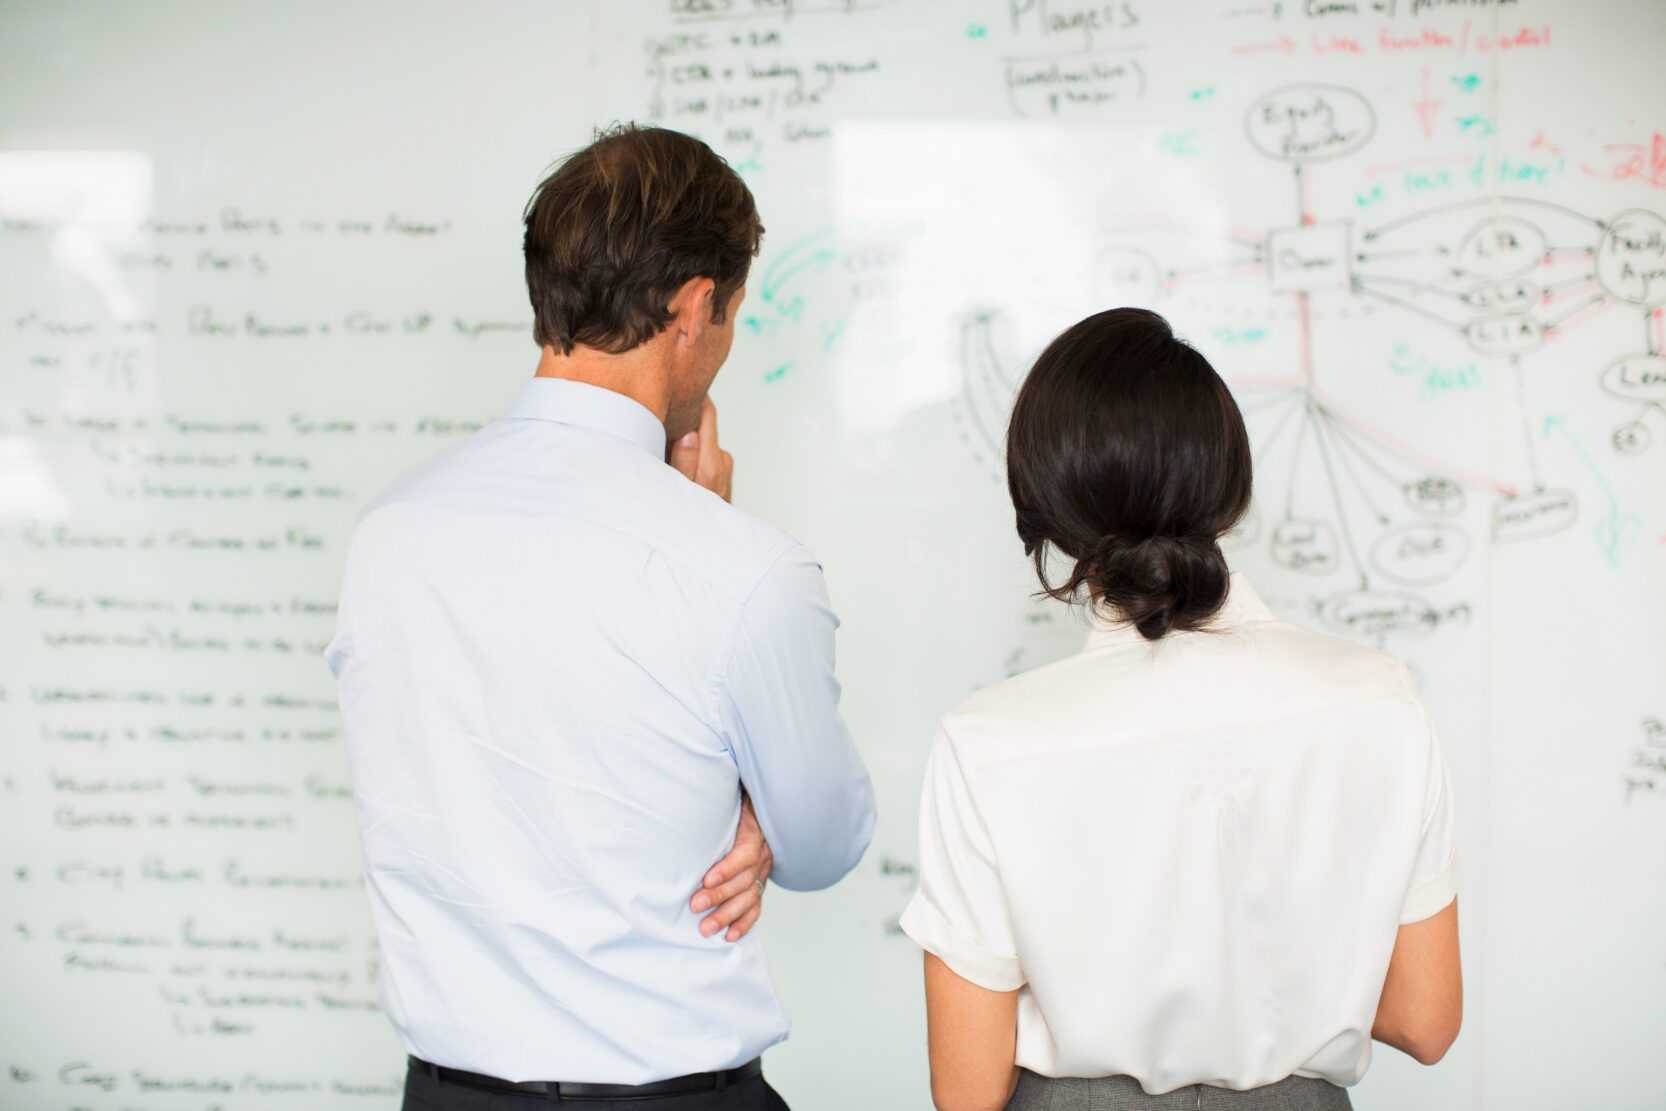 business consultant and client looking at whiteboard together